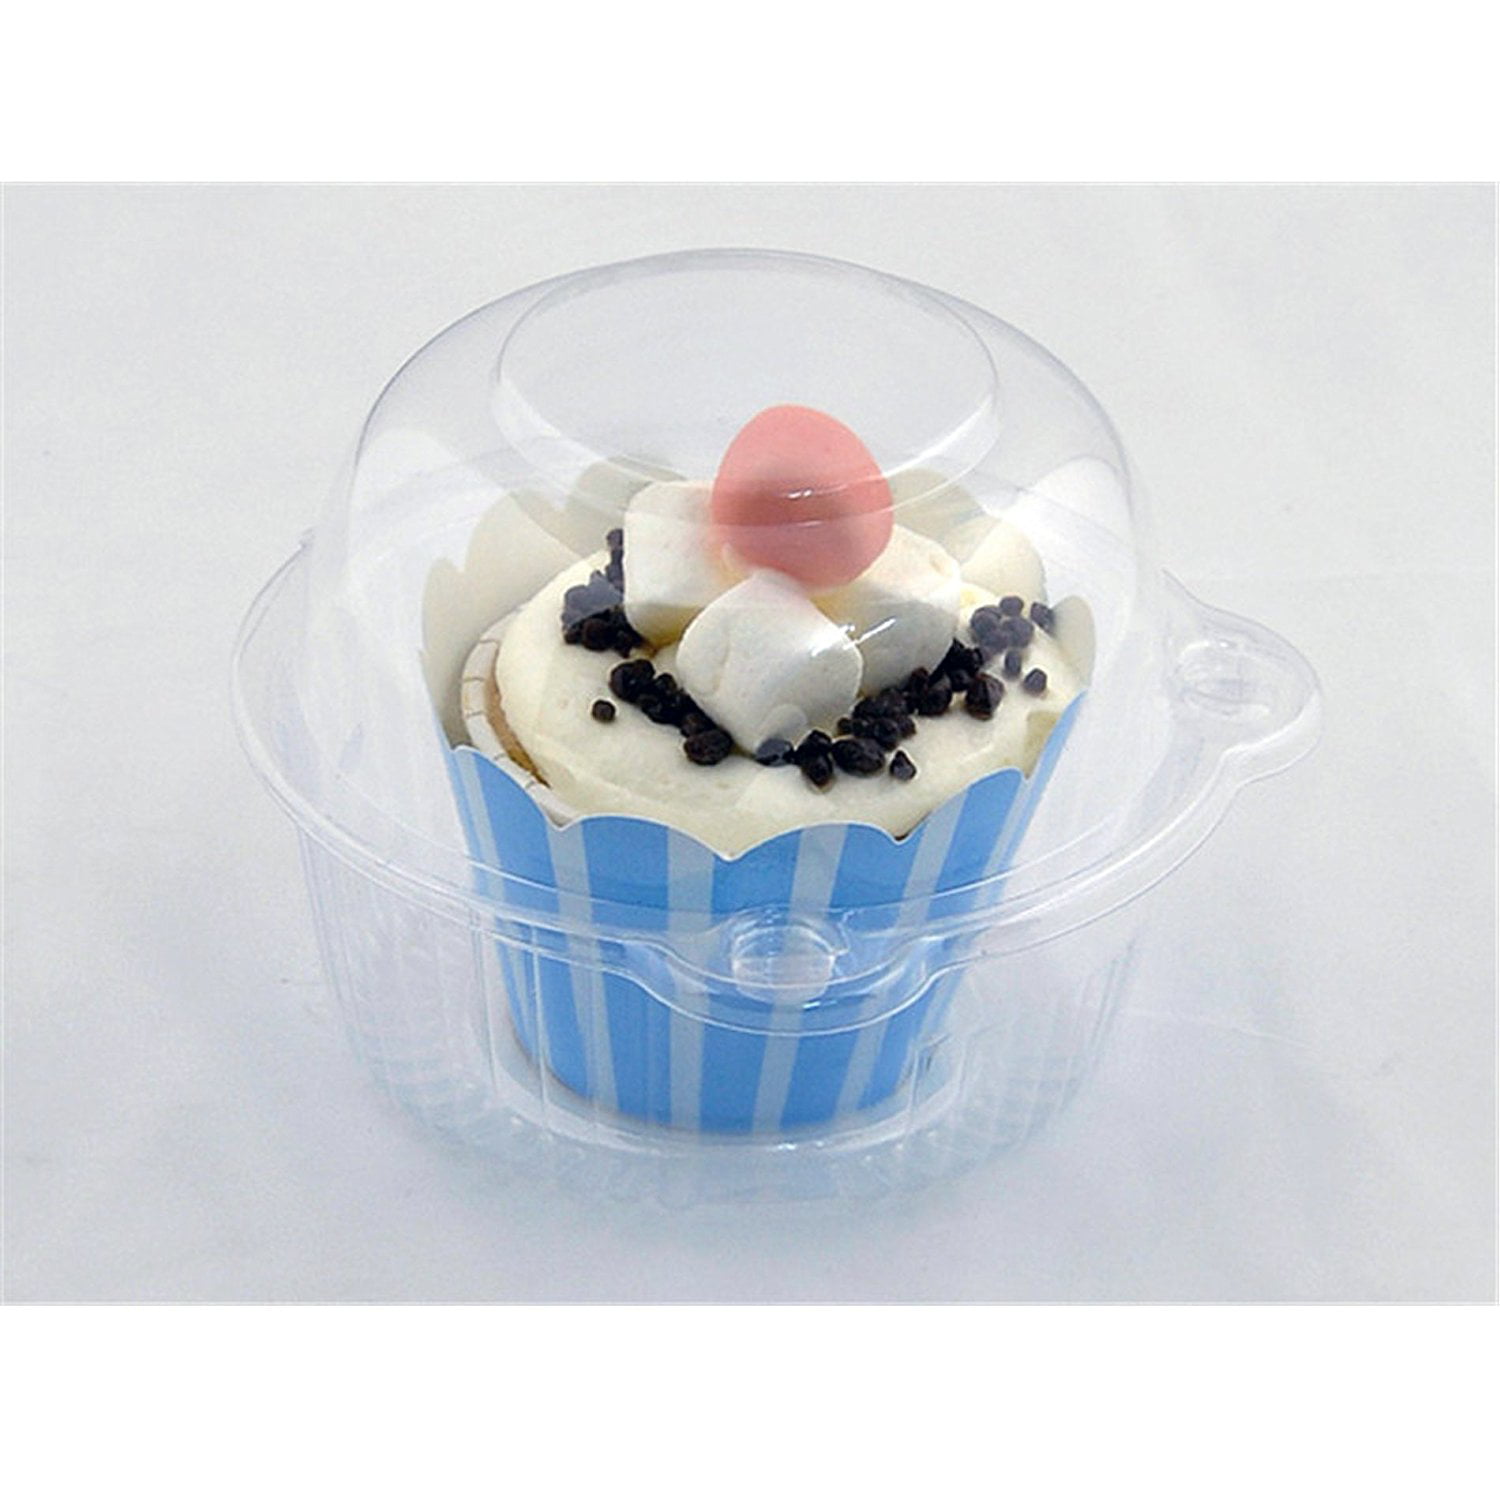 50 Set 2.7 Clear Plastic Cupcake Cake Case Muffin Pod Dome Holder Boxes Party